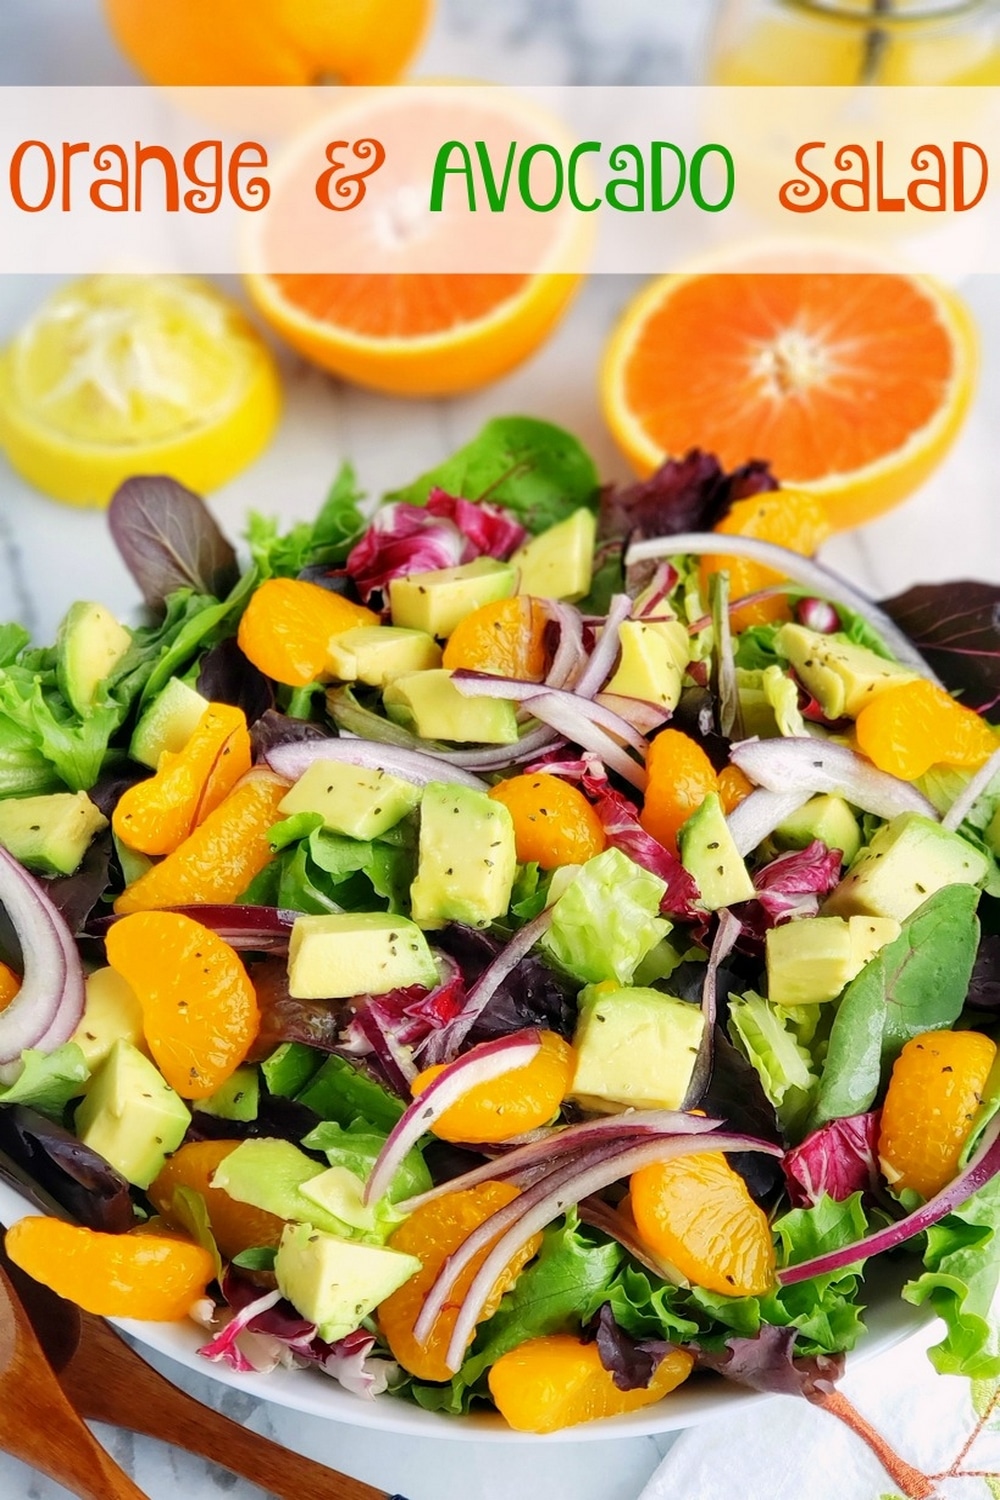 This refreshing Orange and Avocado Salad makes a colorful and flavorful lunch or dinner meal salad. I especially love this salad served as a side dish with a Mexican-inspired meal.  via @cmpollak1